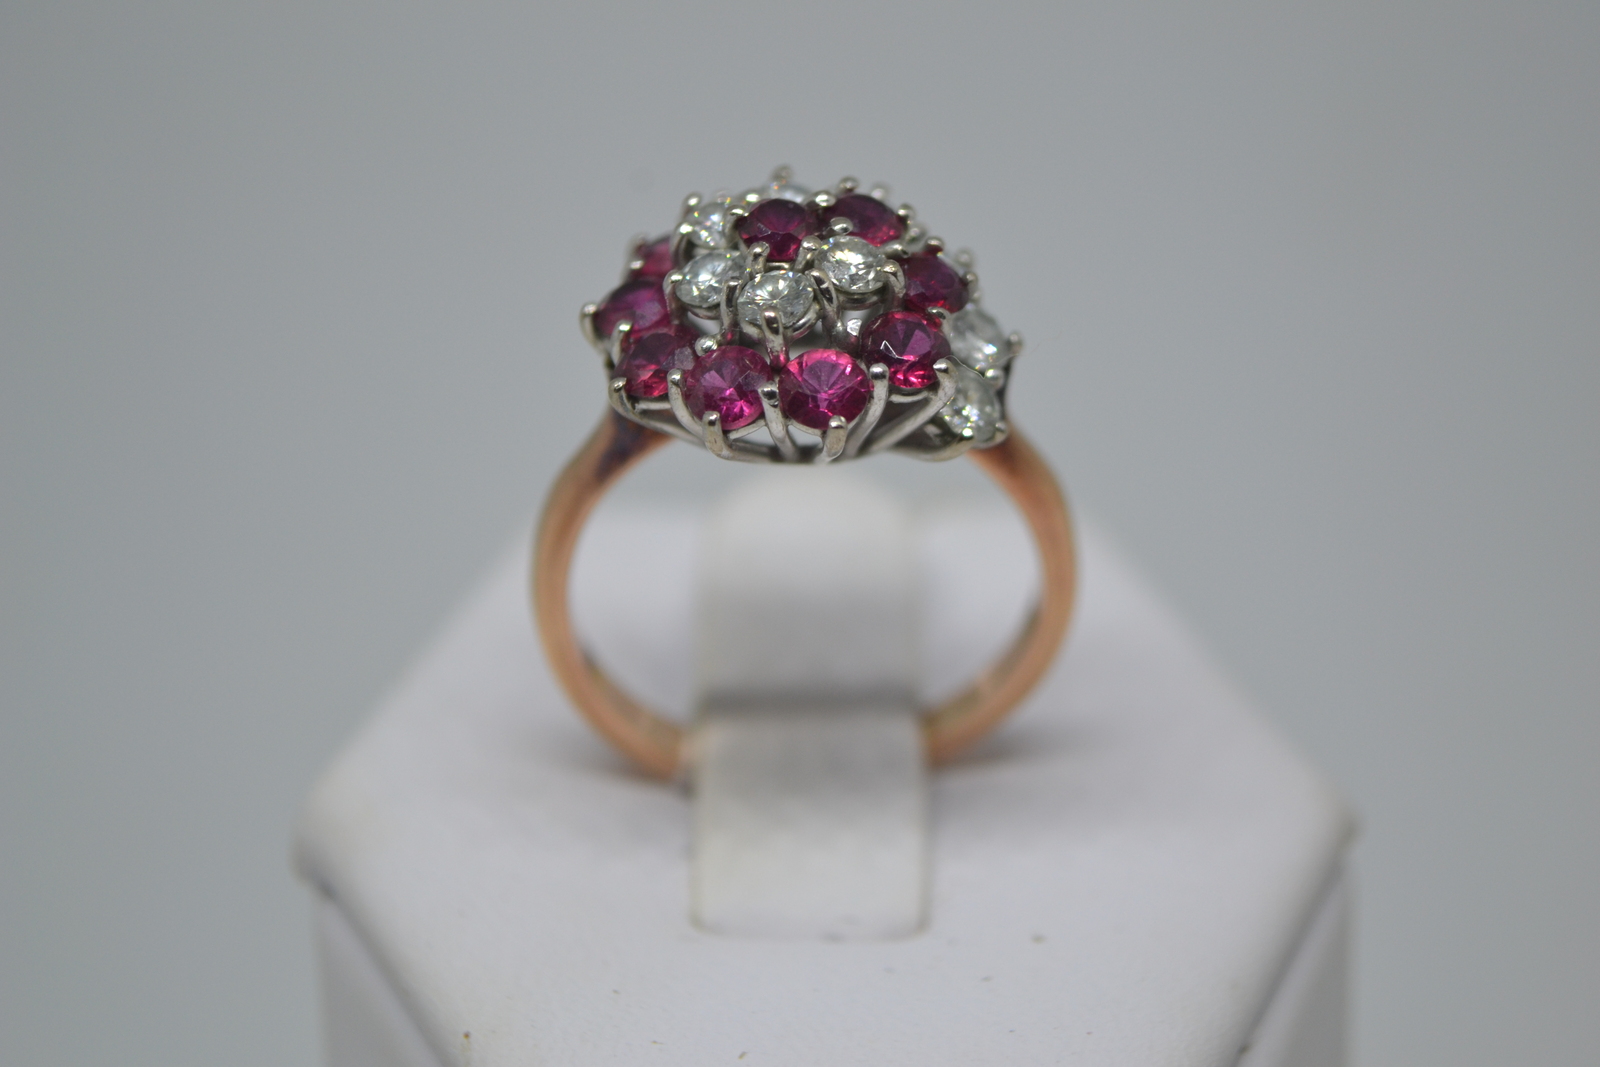 Mid 19thc. 9ct Gold Ring Swirl Set With Diamonds And Rubies.